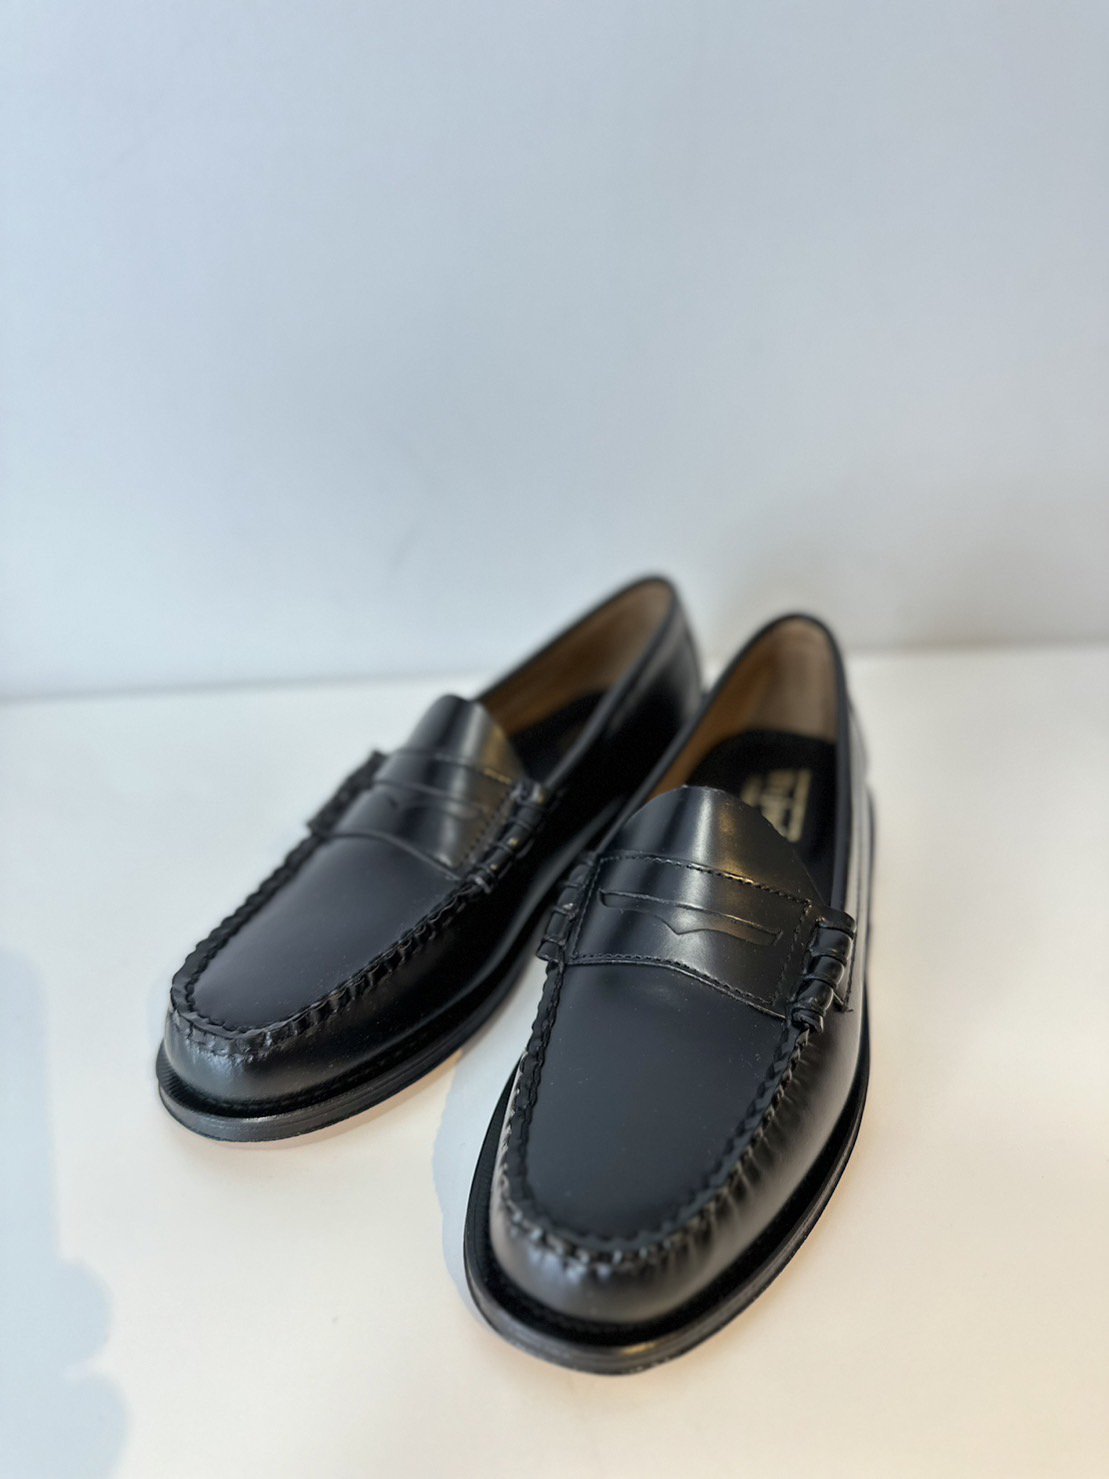 G.H.BASS<br />LARSON / BLACK (LEATHER SOLE)<img class='new_mark_img2' src='https://img.shop-pro.jp/img/new/icons14.gif' style='border:none;display:inline;margin:0px;padding:0px;width:auto;' />